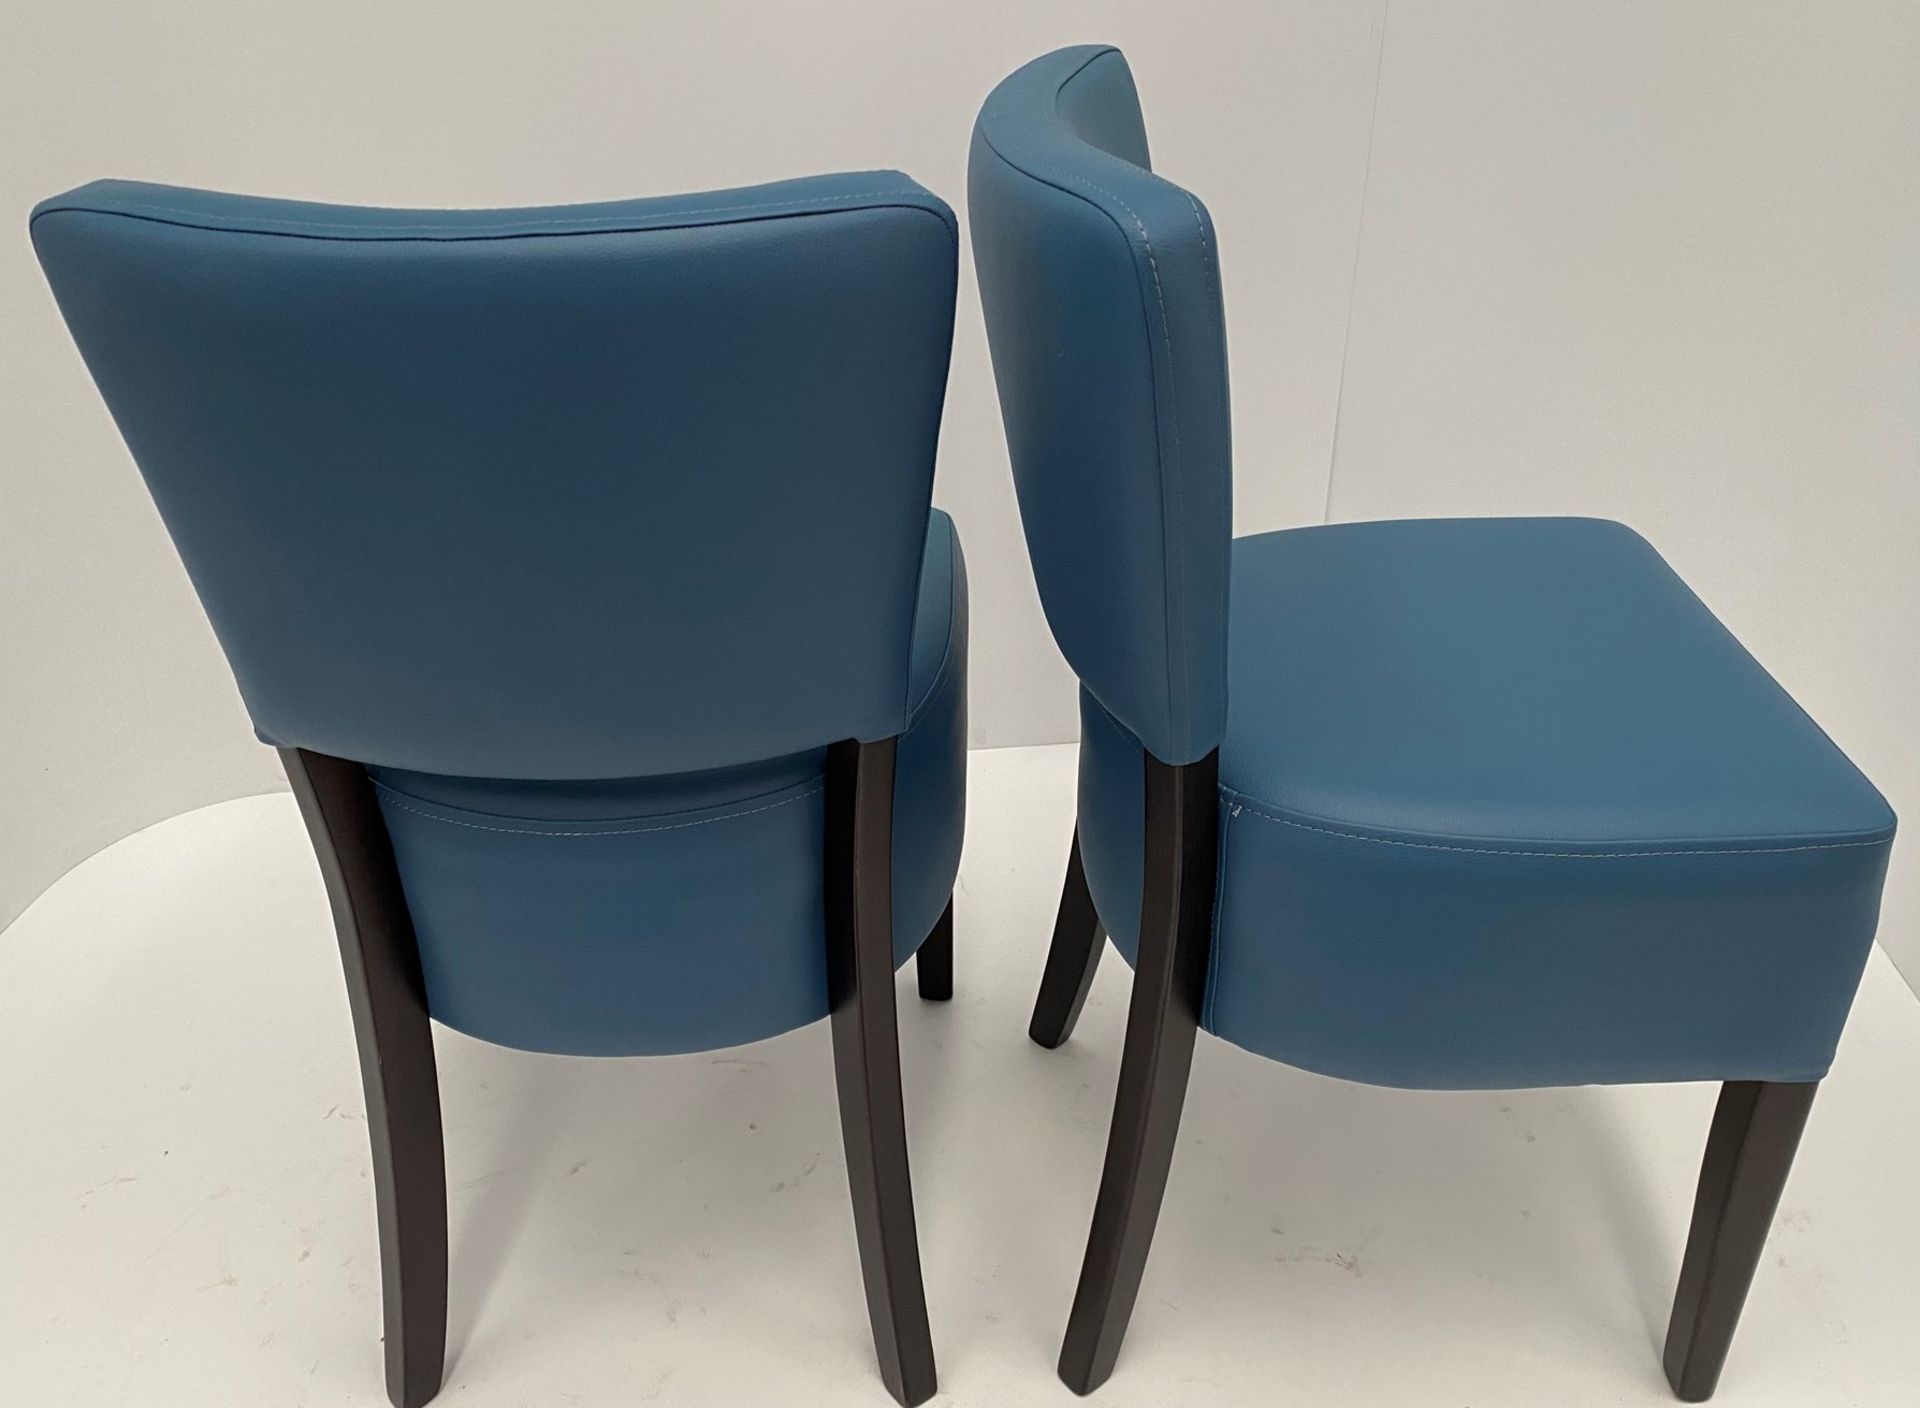 2 x Oregon Vena Lagoon NC19 side/dining chairs with Wenge coloured frames - Image 2 of 3